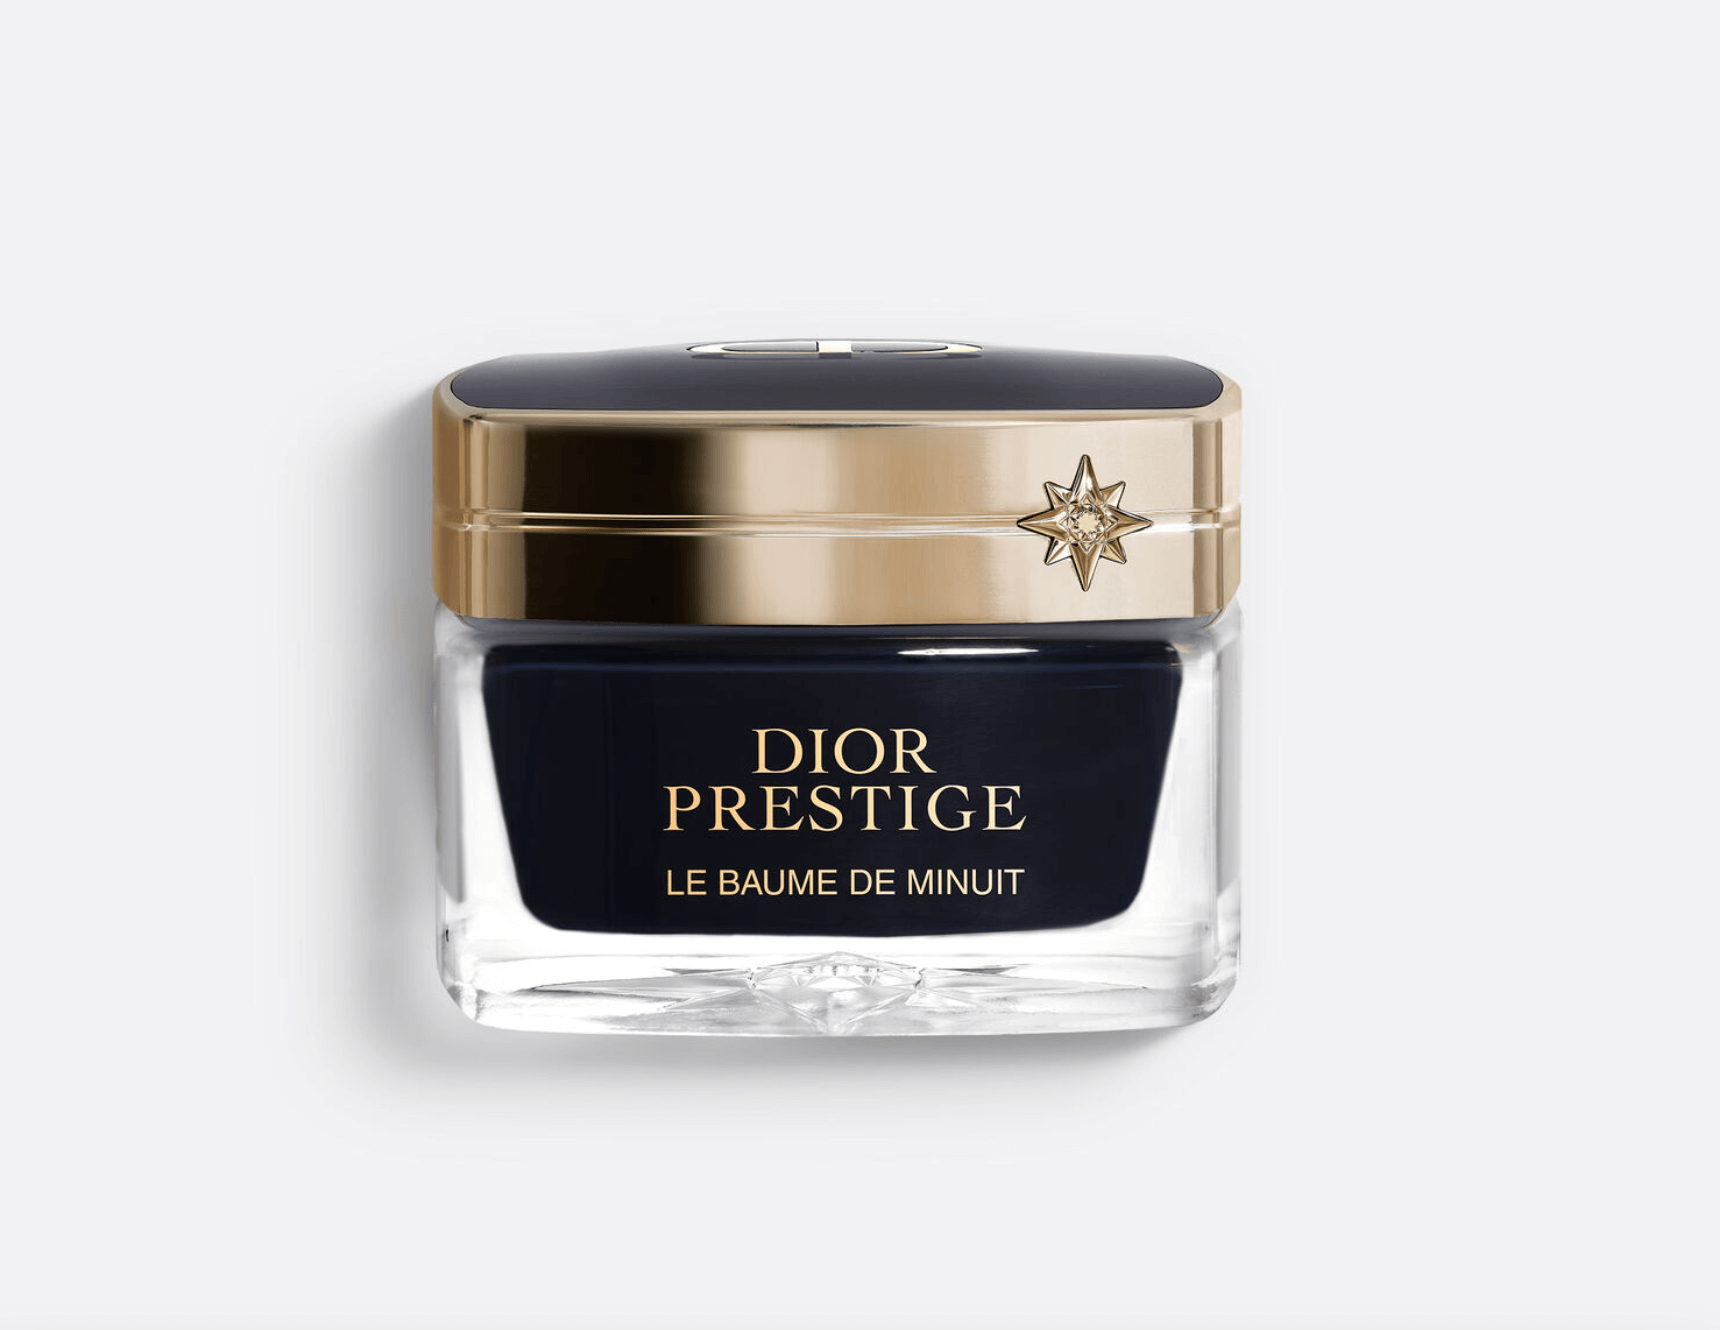 Dior has launched its new anti-aging night cream, Dior Prestige Le Baume de Minuit, as part of their Dior Prestige line, aiming to enhance the effectiveness of nighttime skincare. 